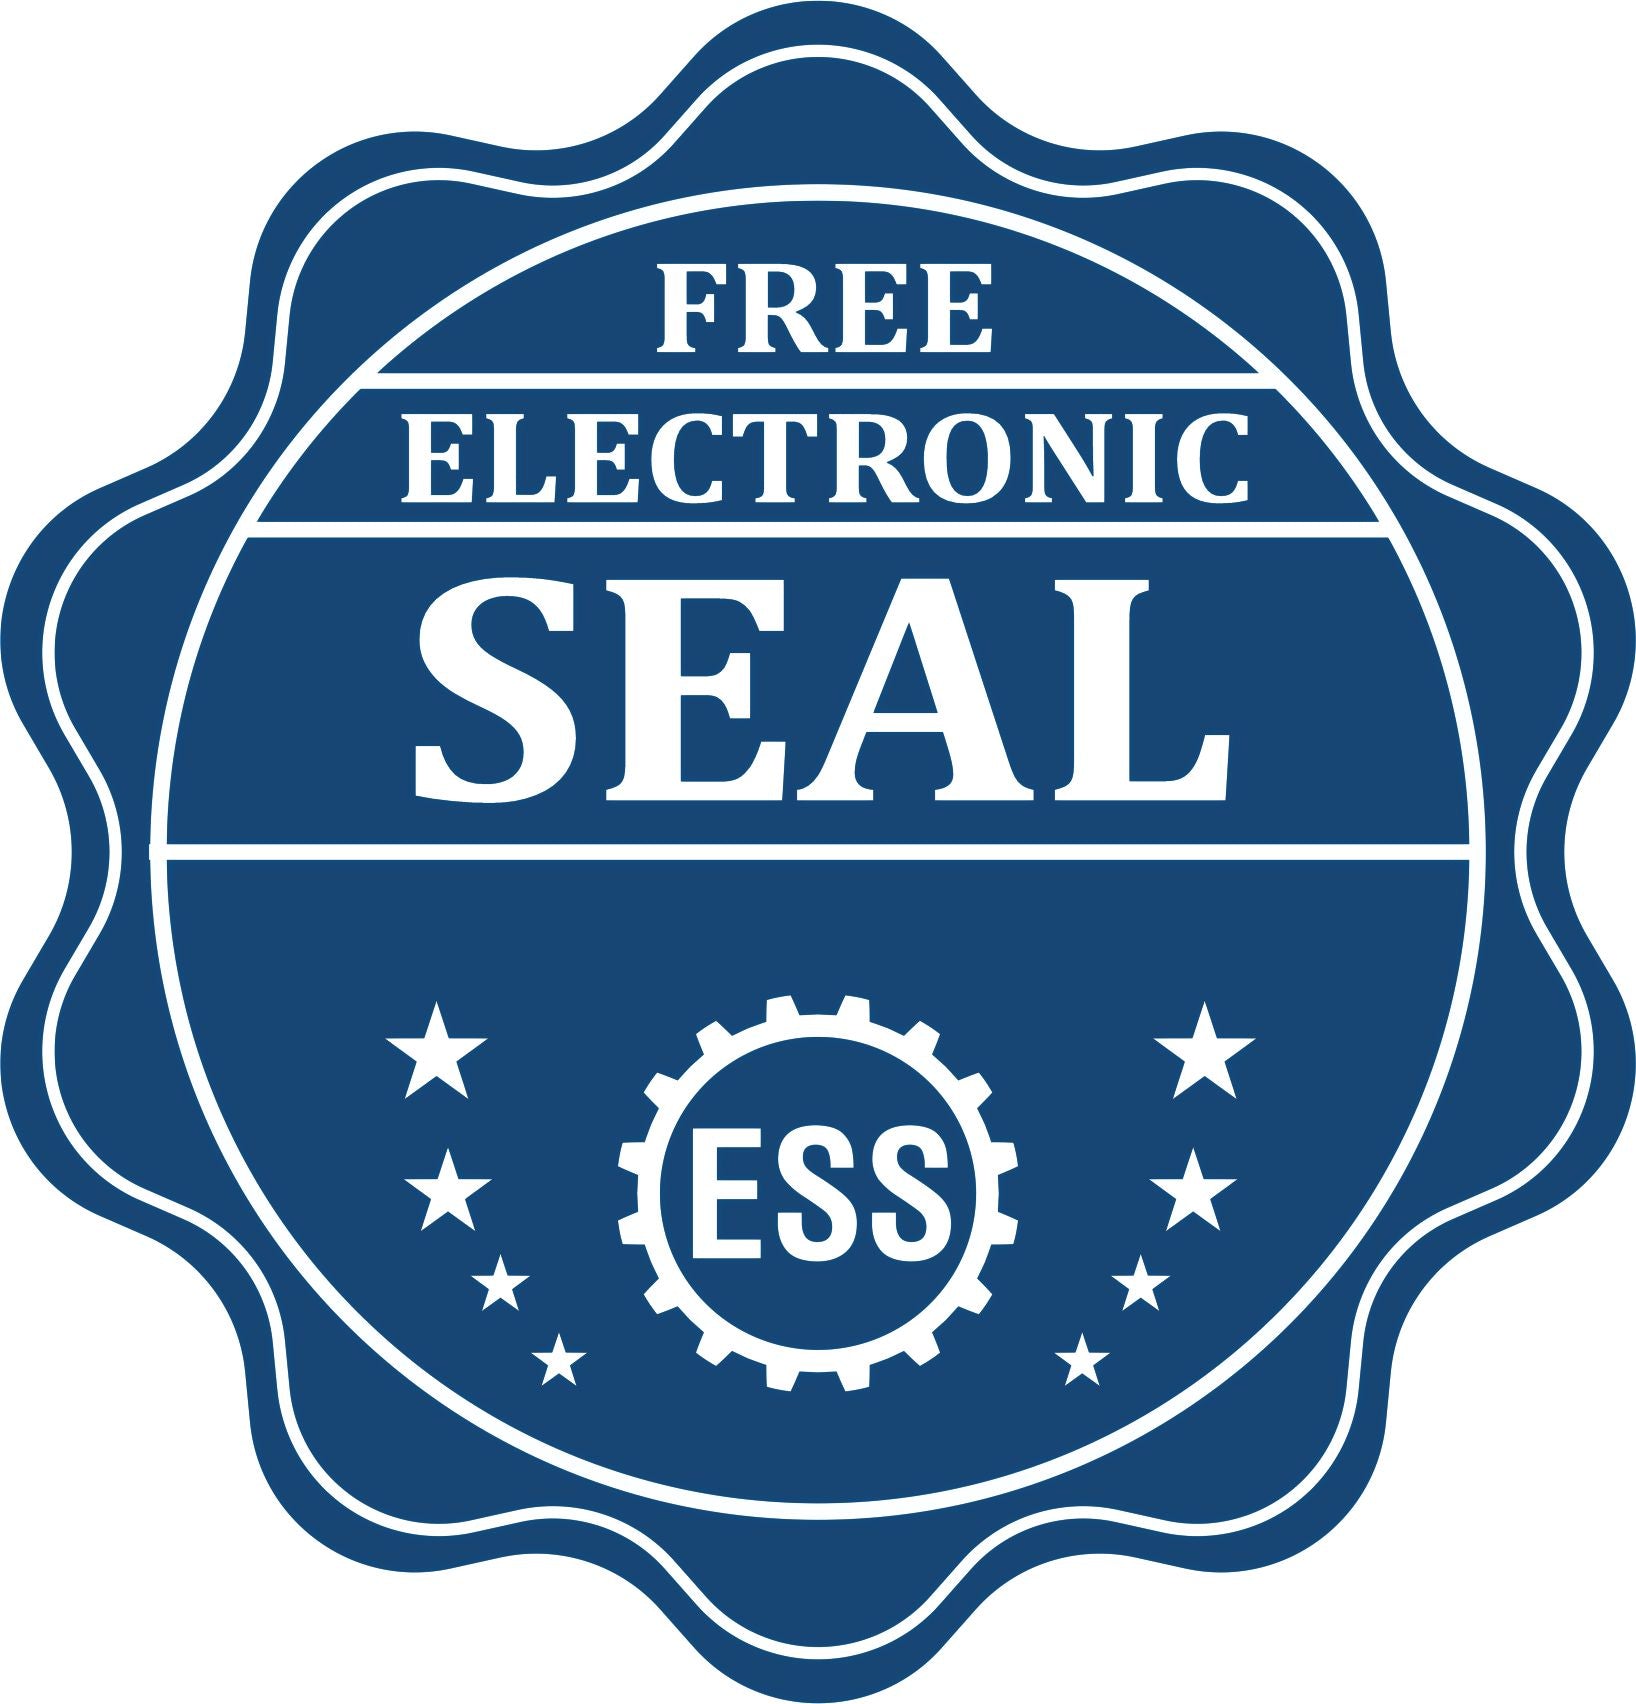 A badge showing a free electronic seal for the Gift Tennessee Engineer Seal with stars and the ESS gear on the emblem.